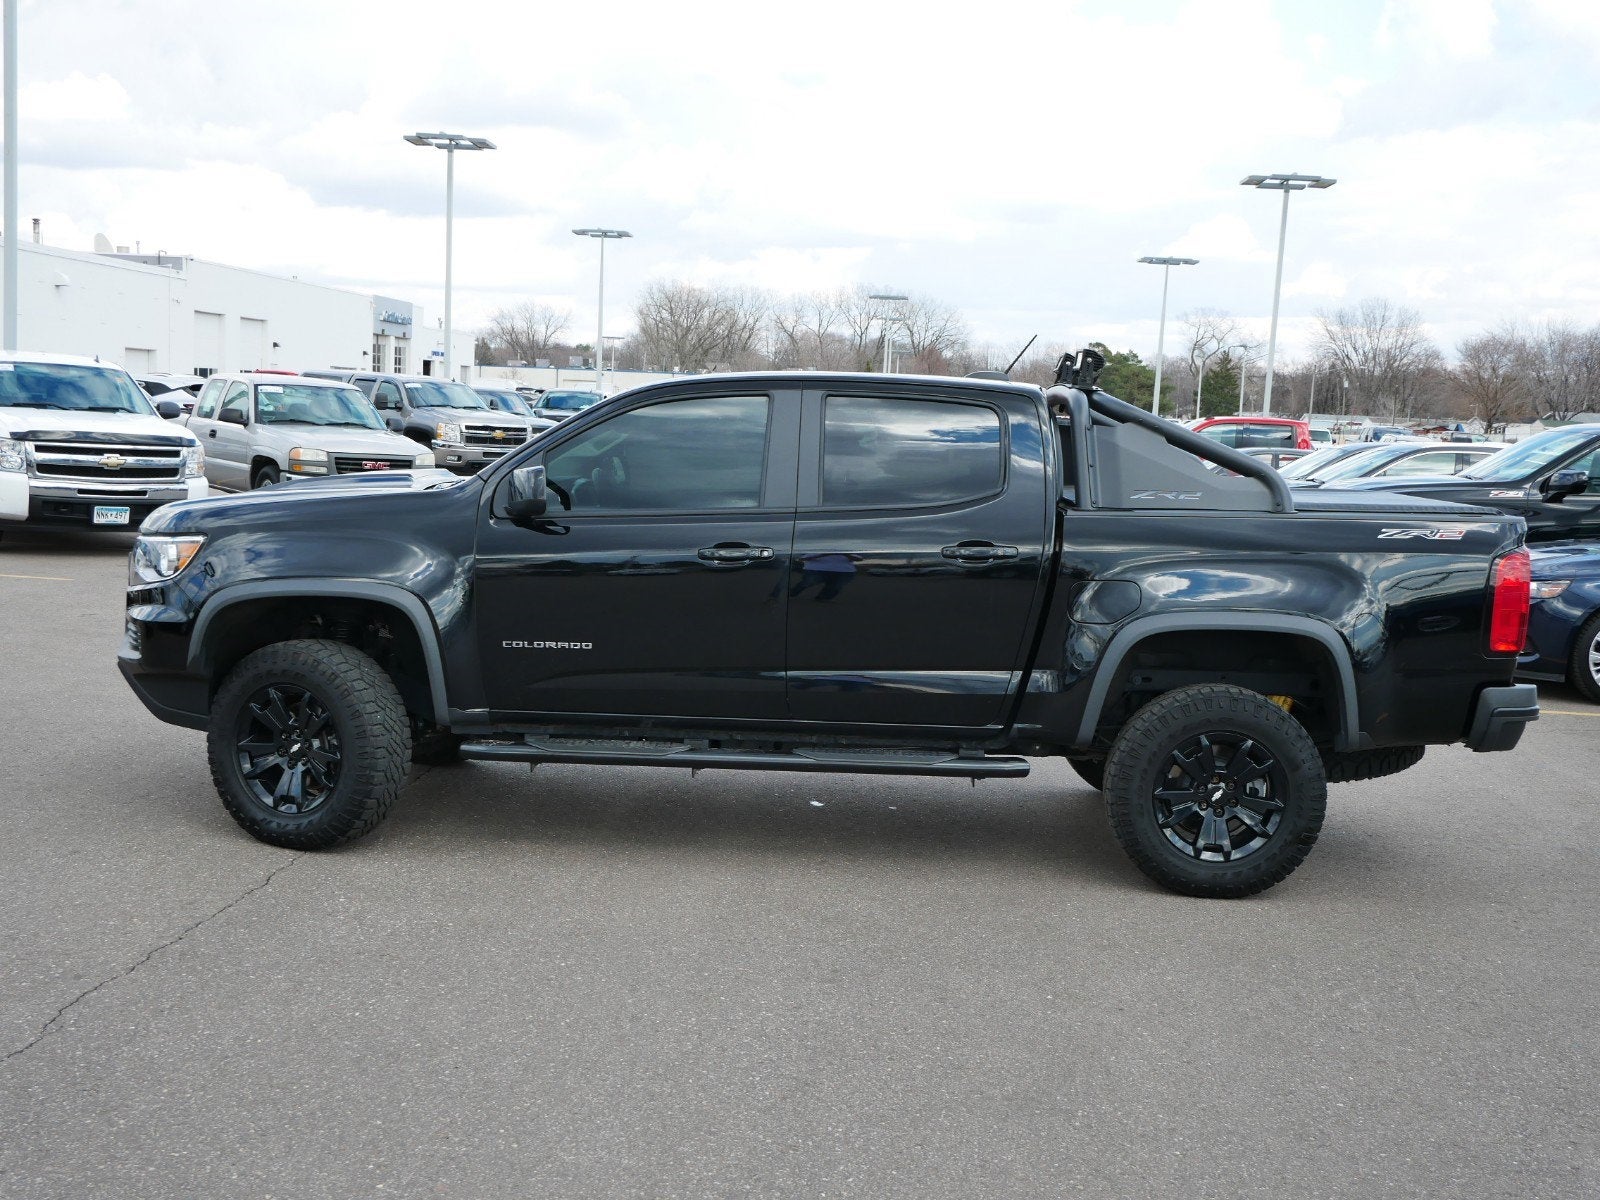 Certified 2021 Chevrolet Colorado ZR2 with VIN 1GCGTEEN8M1137775 for sale in Fridley, Minnesota